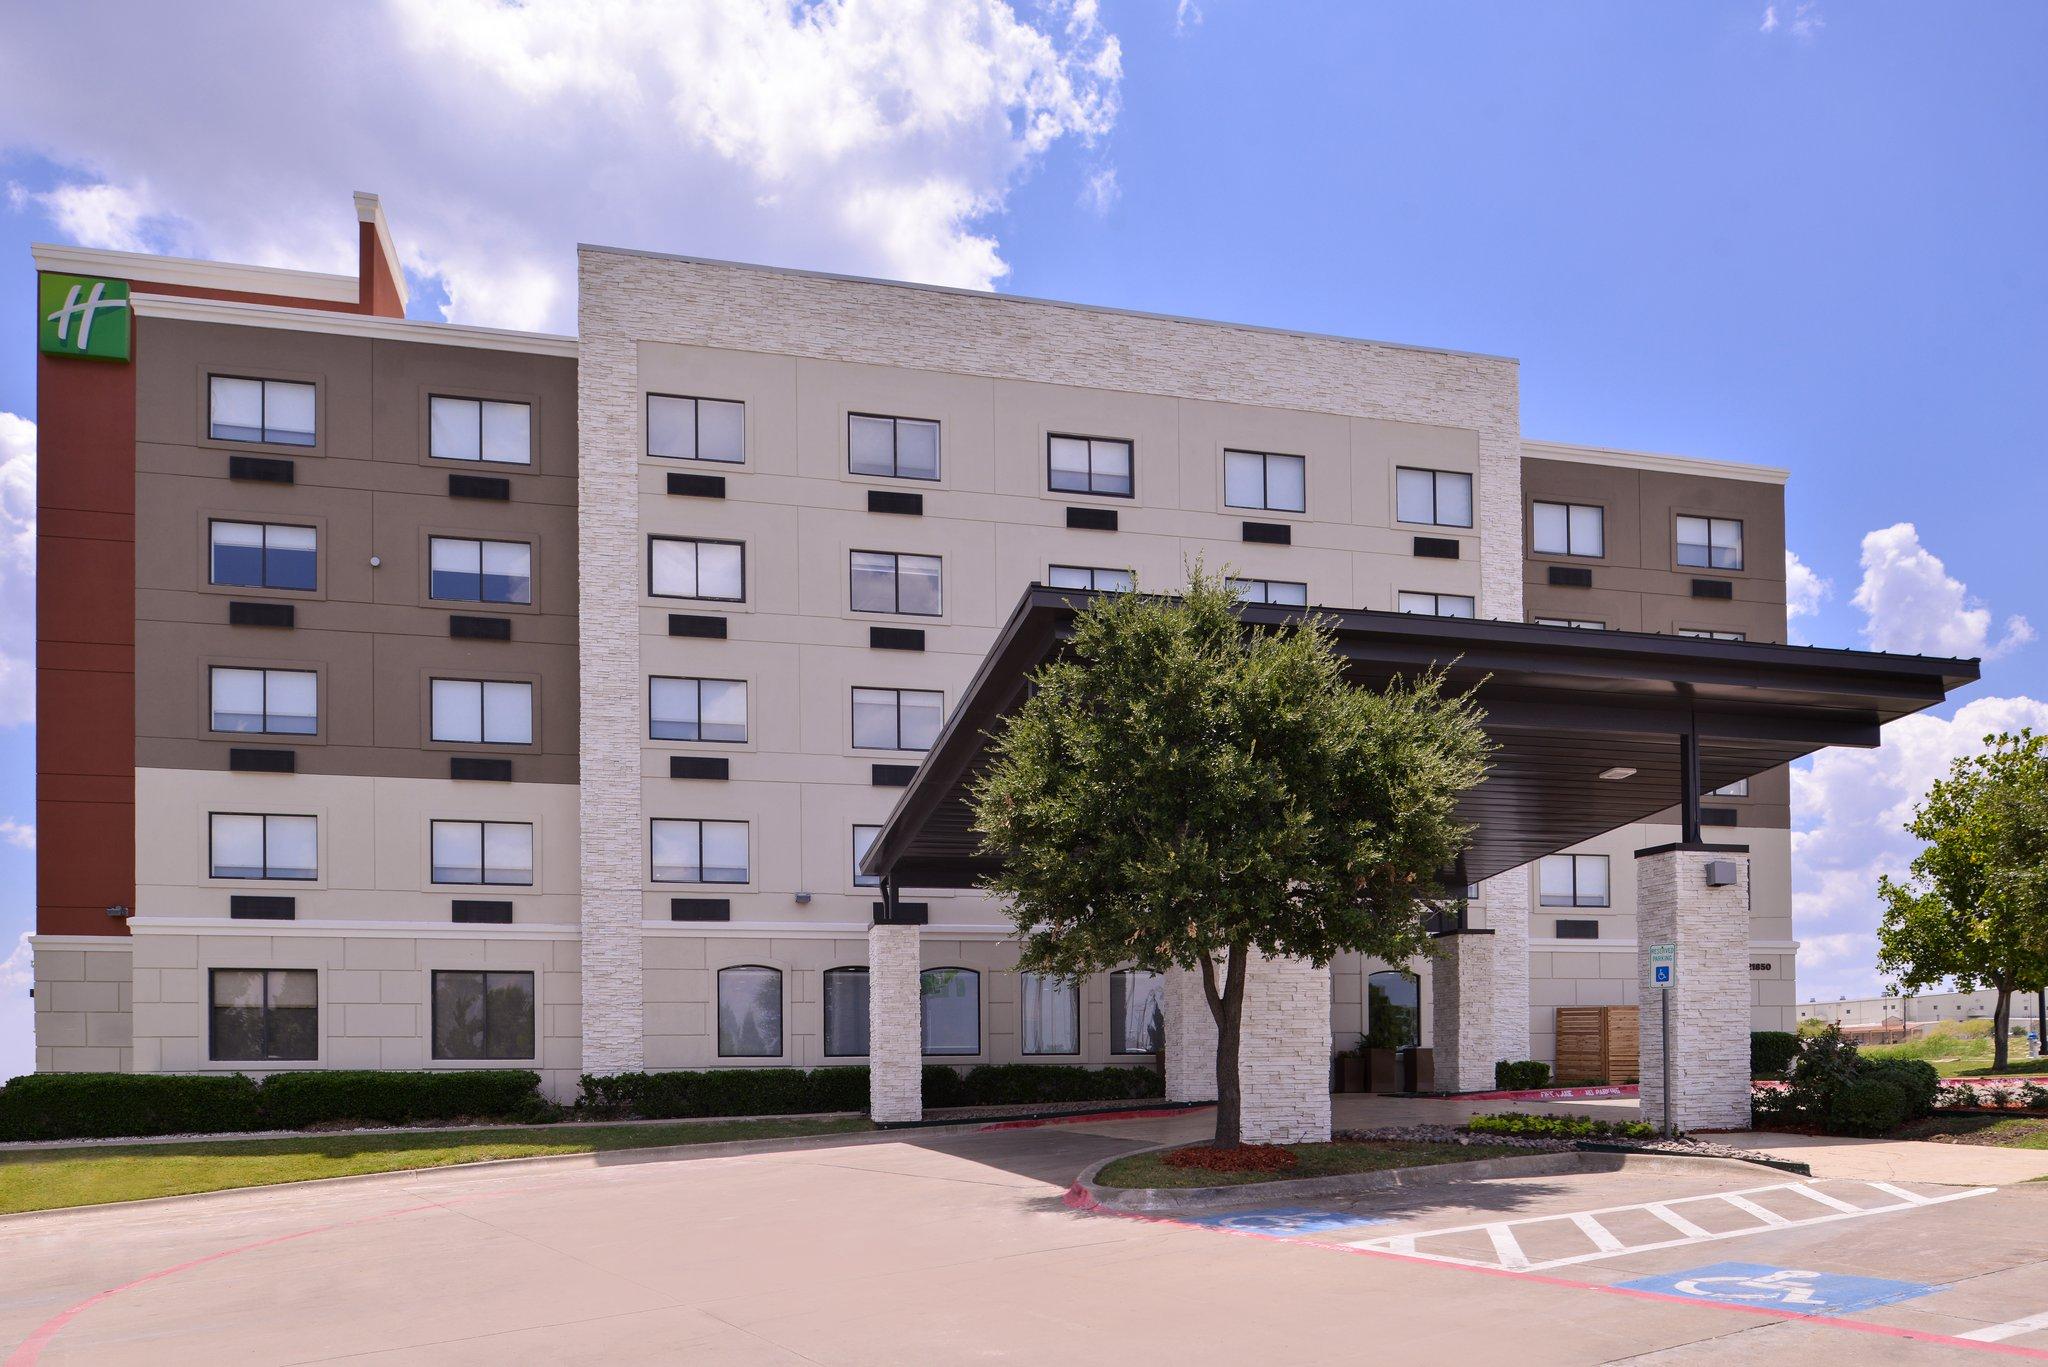 Holiday Inn Express Hotel & Suites Mesquite in Mesquite, TX